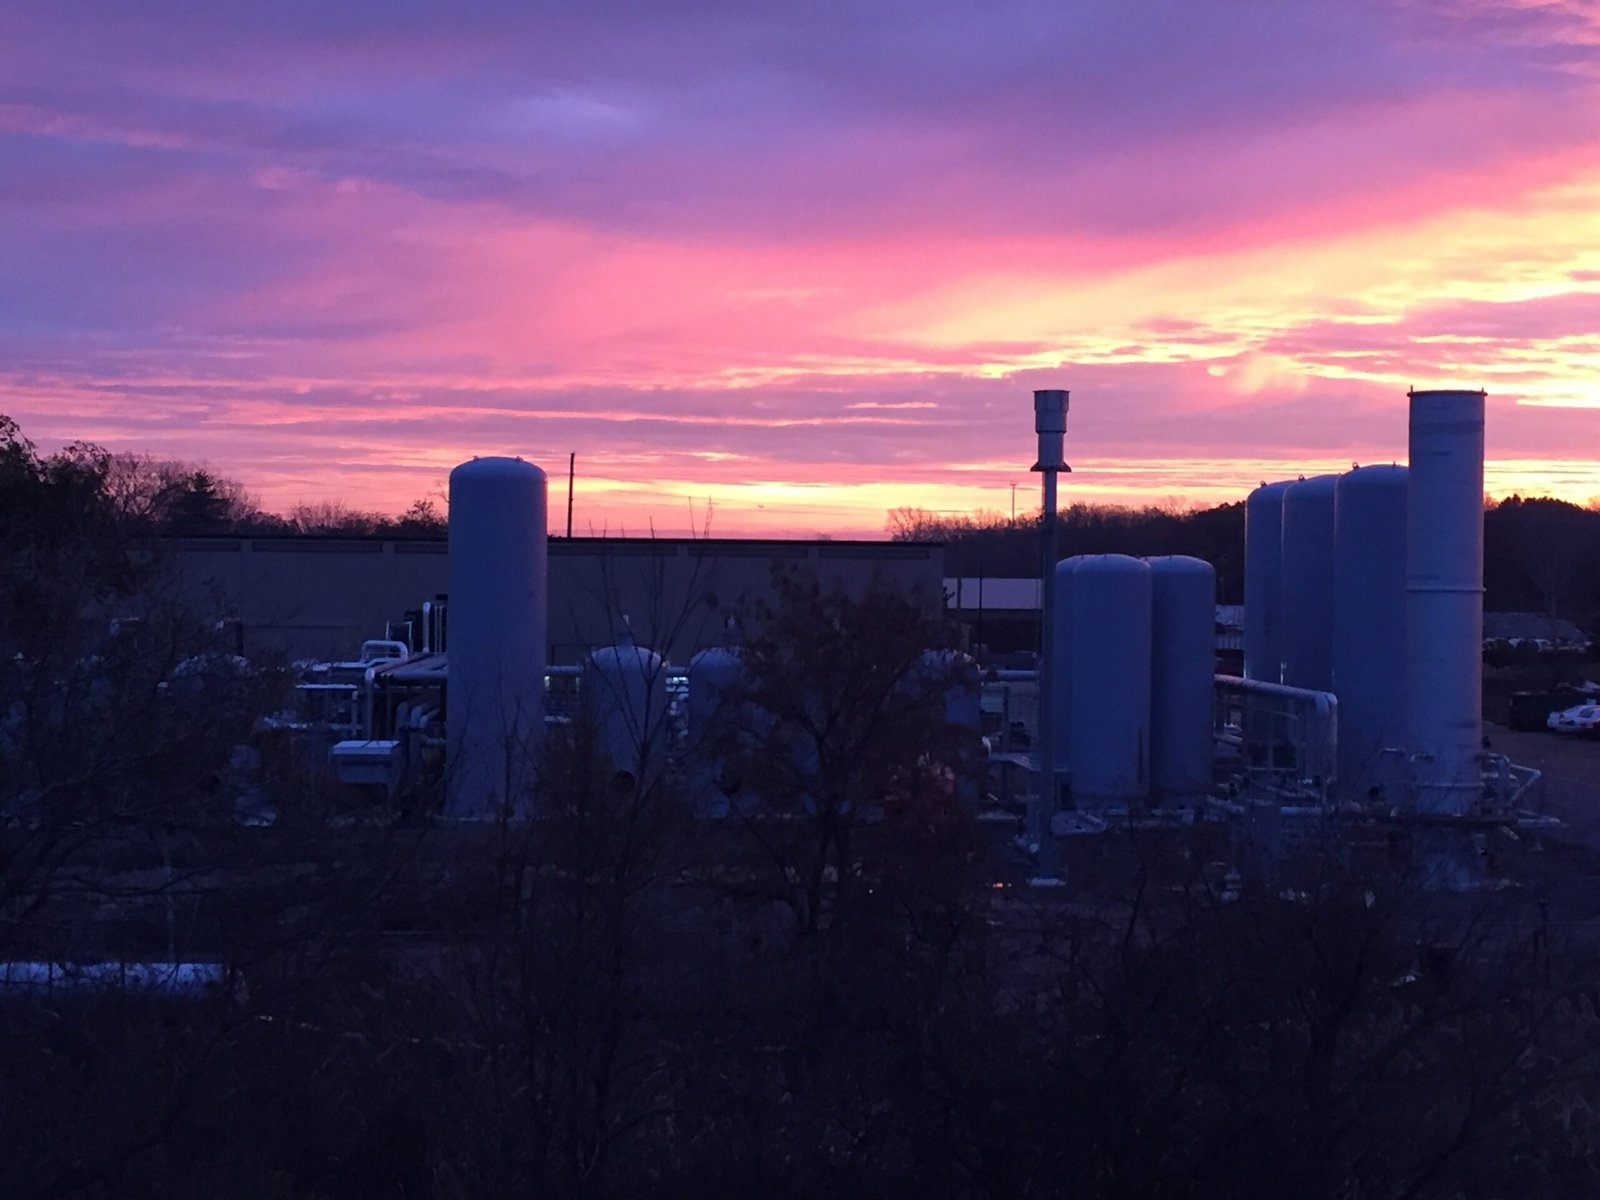 Ameresco’s Woodland Meadows Landfill gas-to-energy facility at sunset.